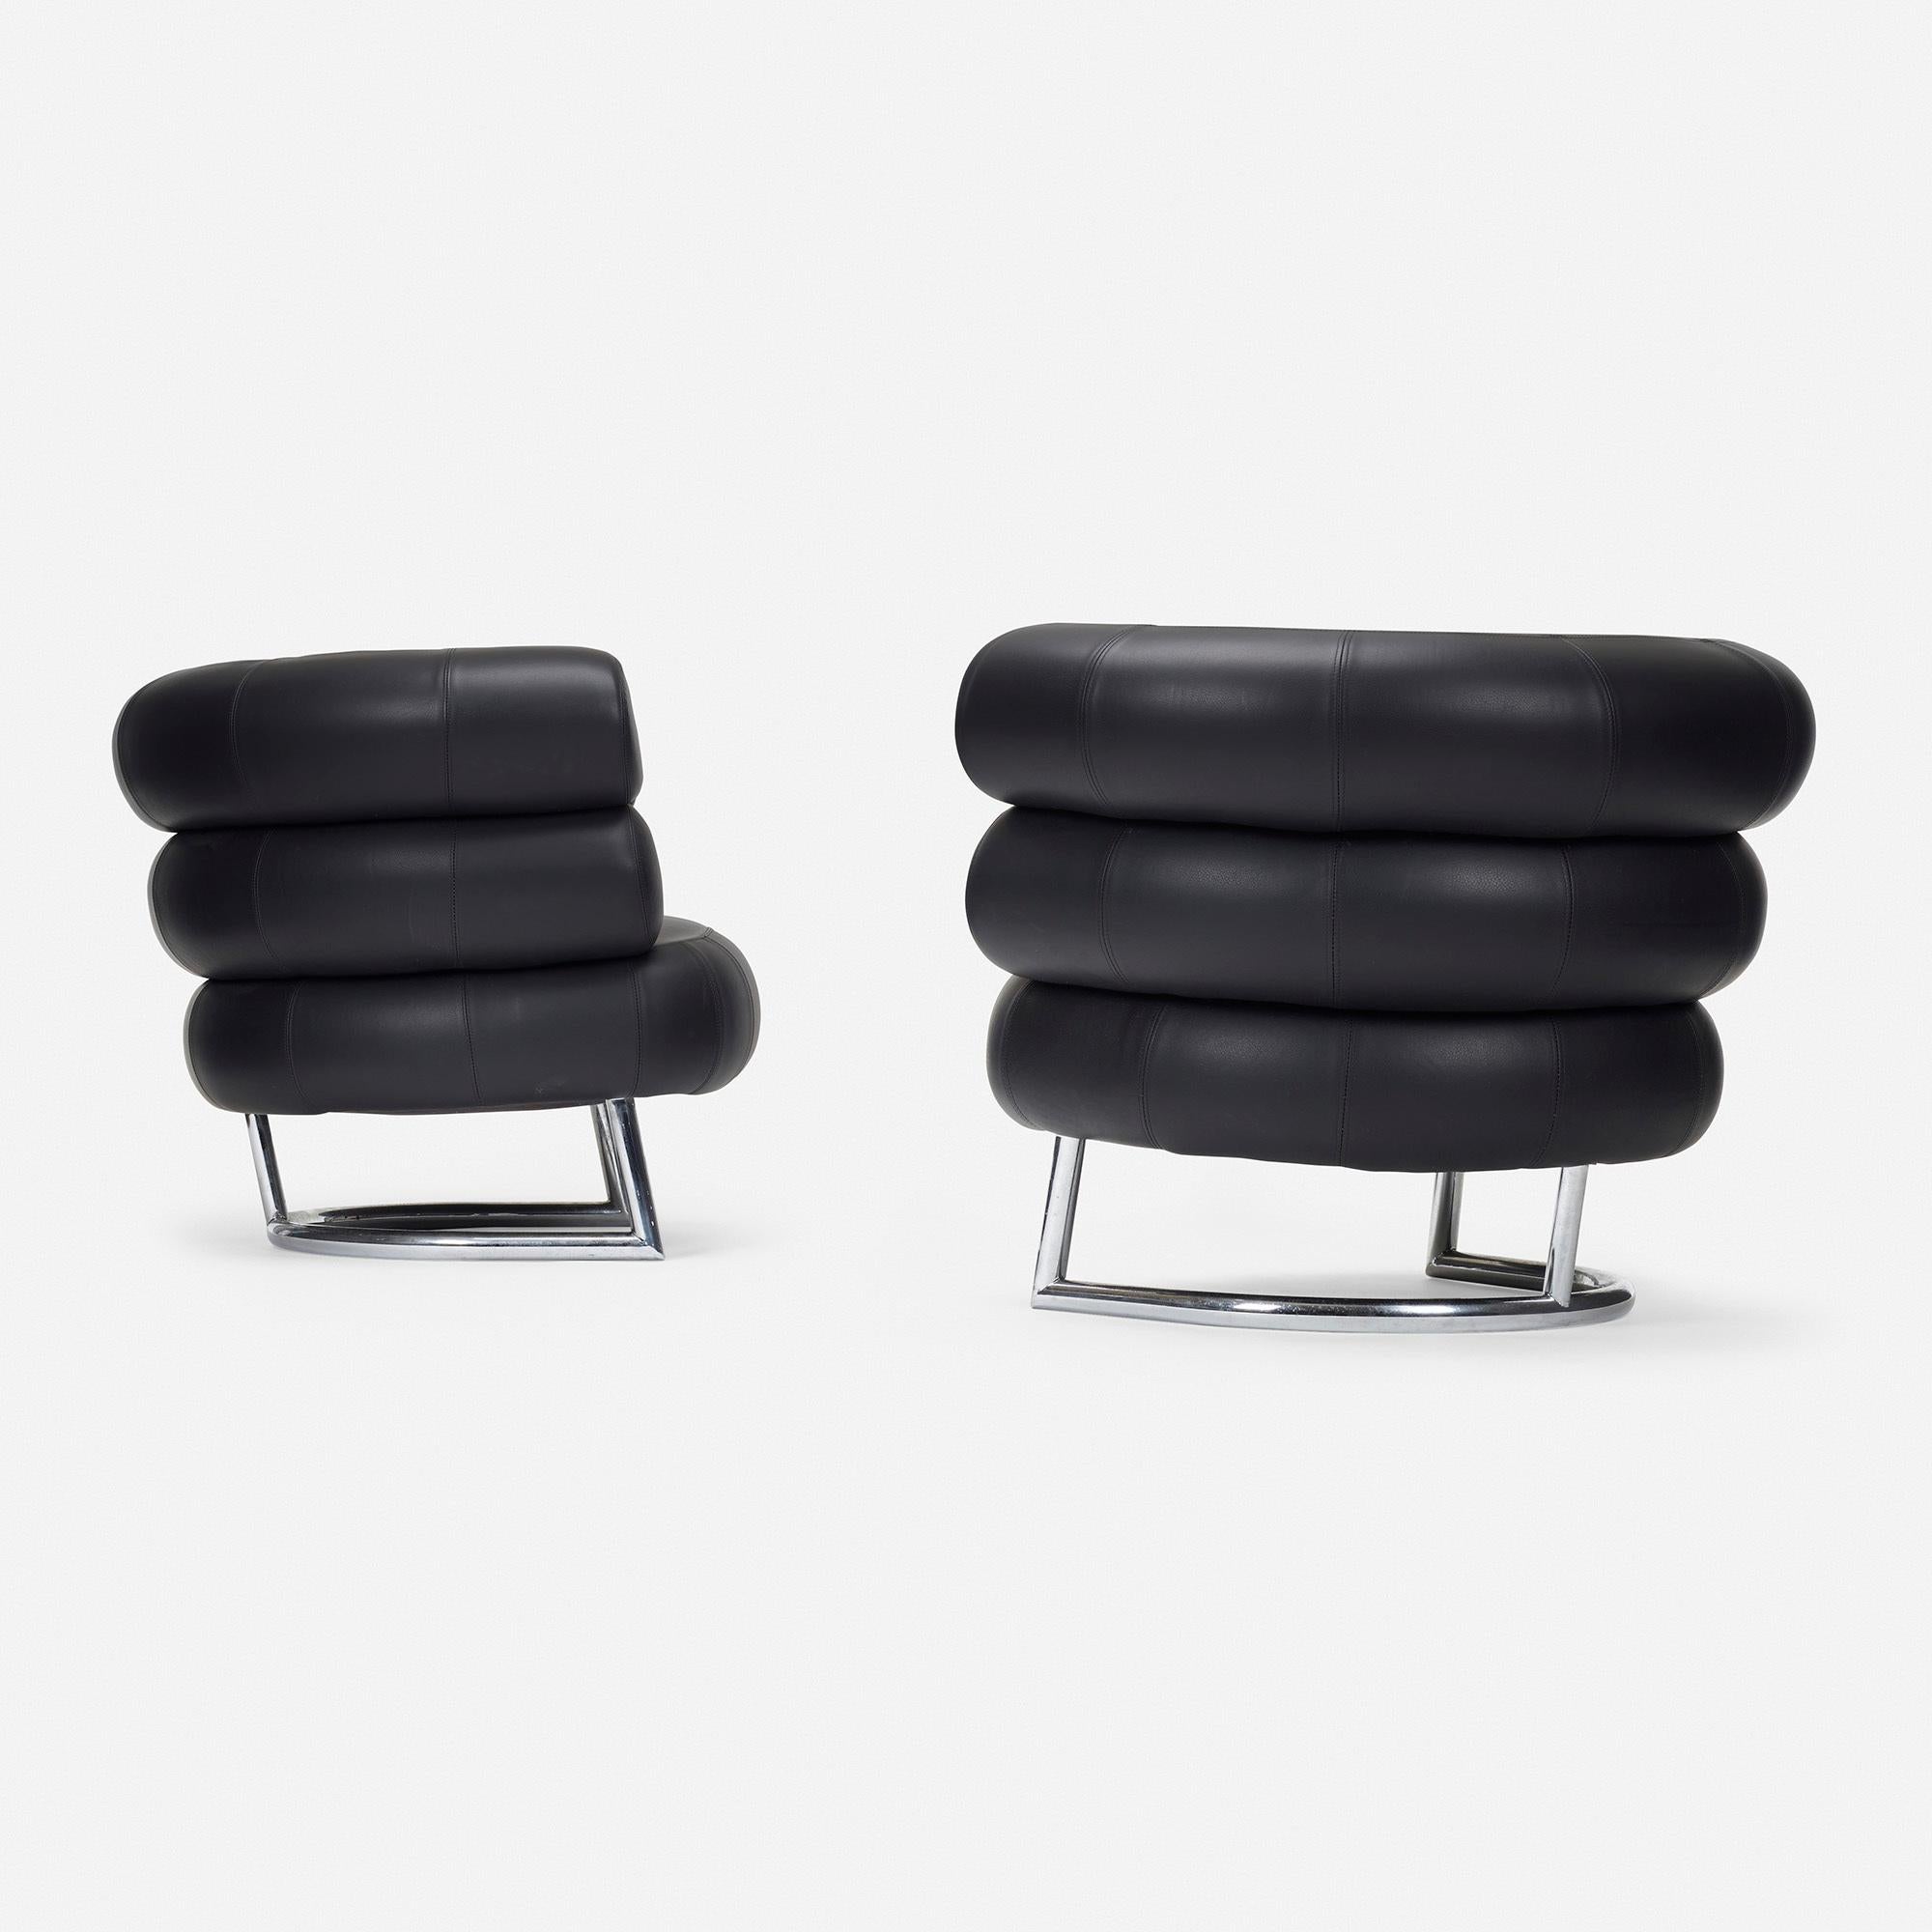 Pair of Bibendum armchairs by Eileen Gray

Made in Ireland

Additional information:
Material: Chrome-plated steel, leather
Size: 36.75 W × 34.5 D × 29.5 H inches Seat height: 16.5 inches 

Condition: Overall this pair is in good, to very